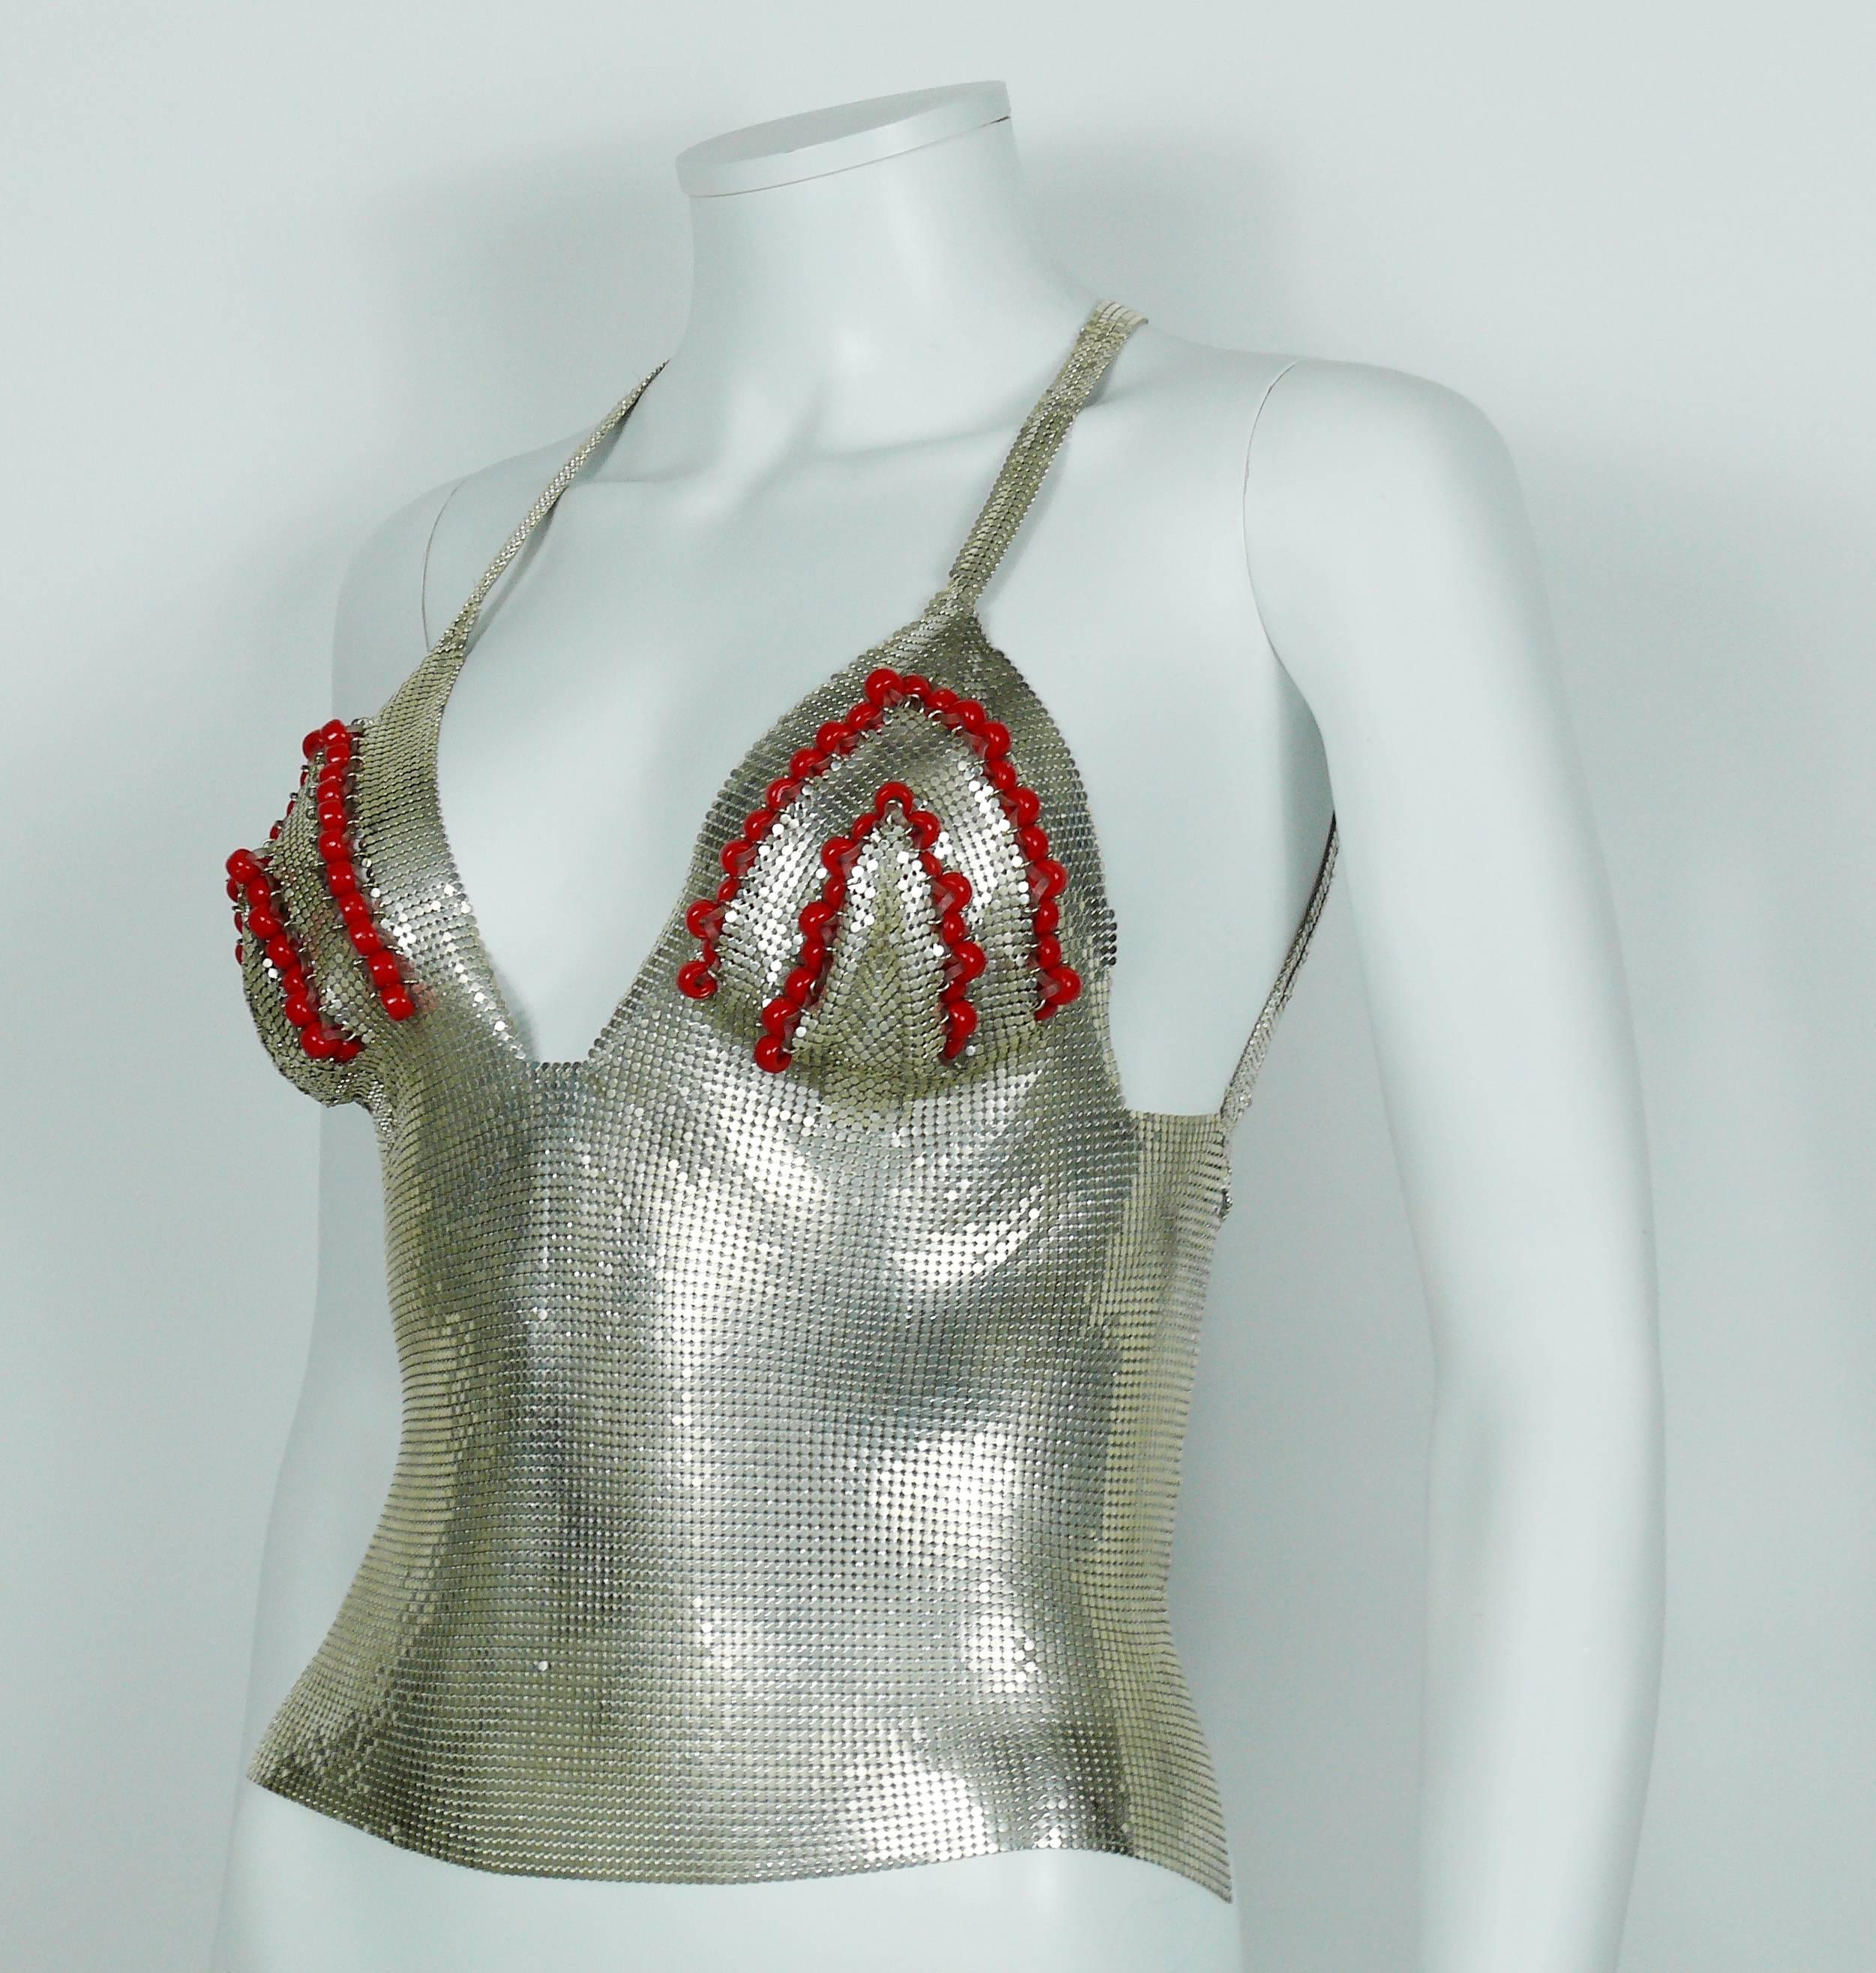 Paco Rabanne Chainmail Halter Top with Resin Bead Chevron Breast Detail In Good Condition For Sale In Nice, FR